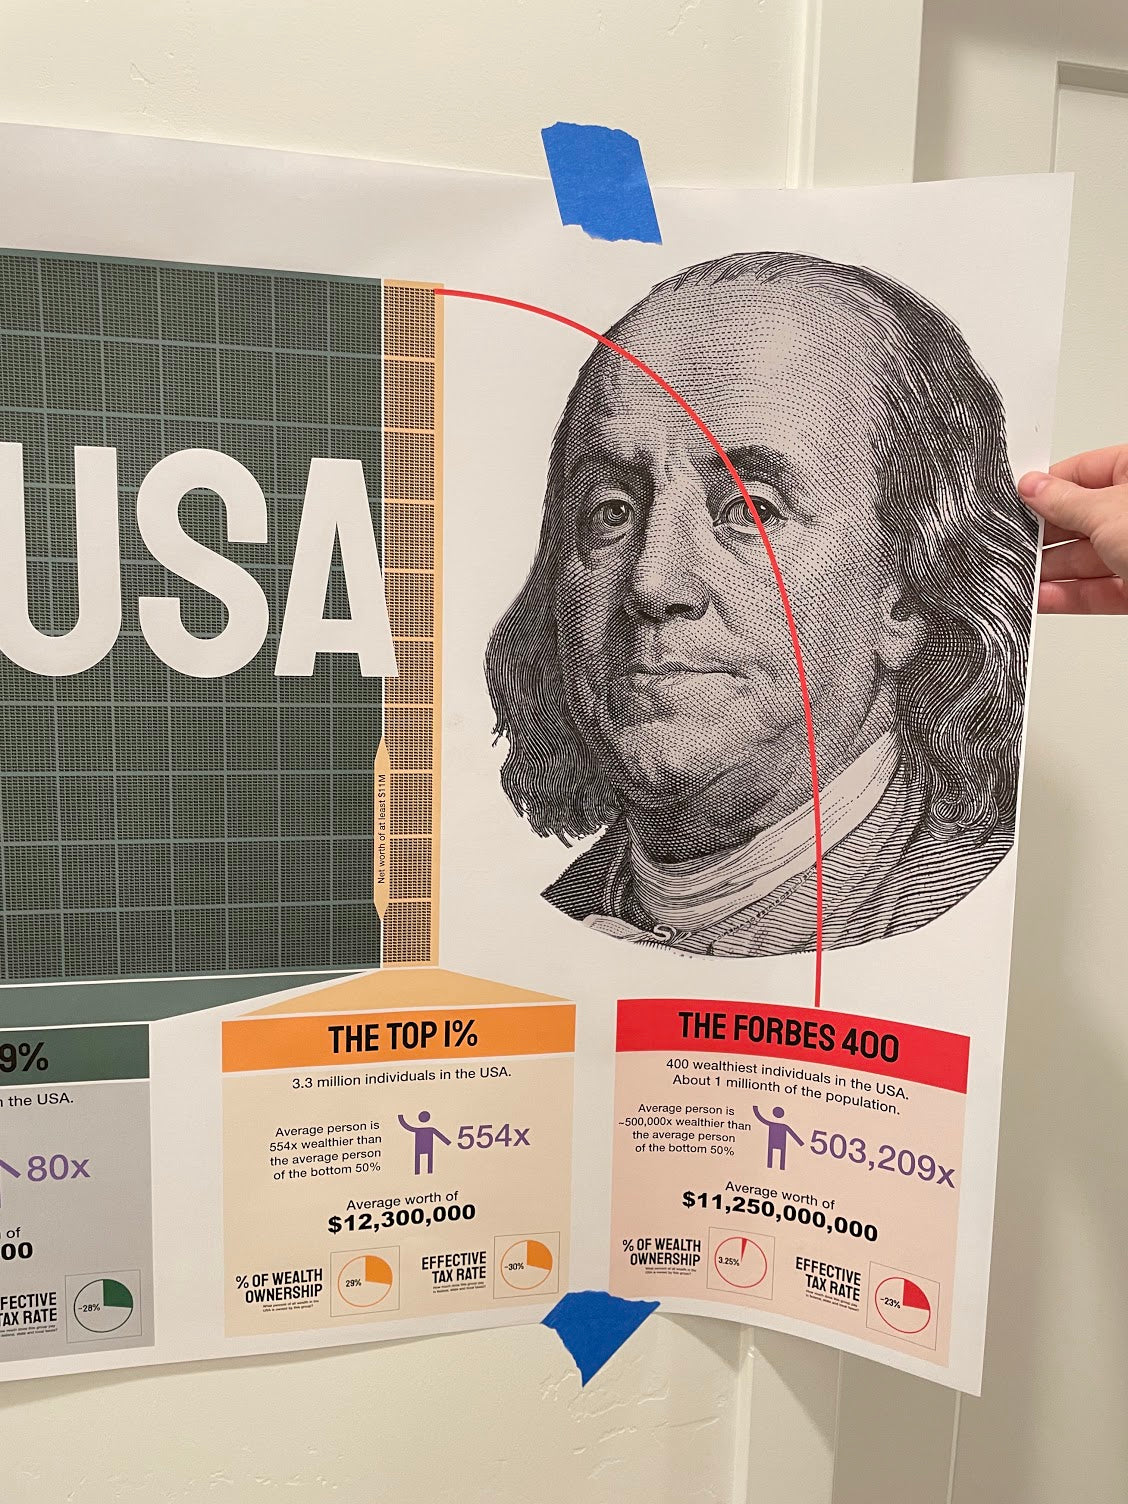 Distribution of Wealth Chart in the USA (2ft tall by almost 10ft long)